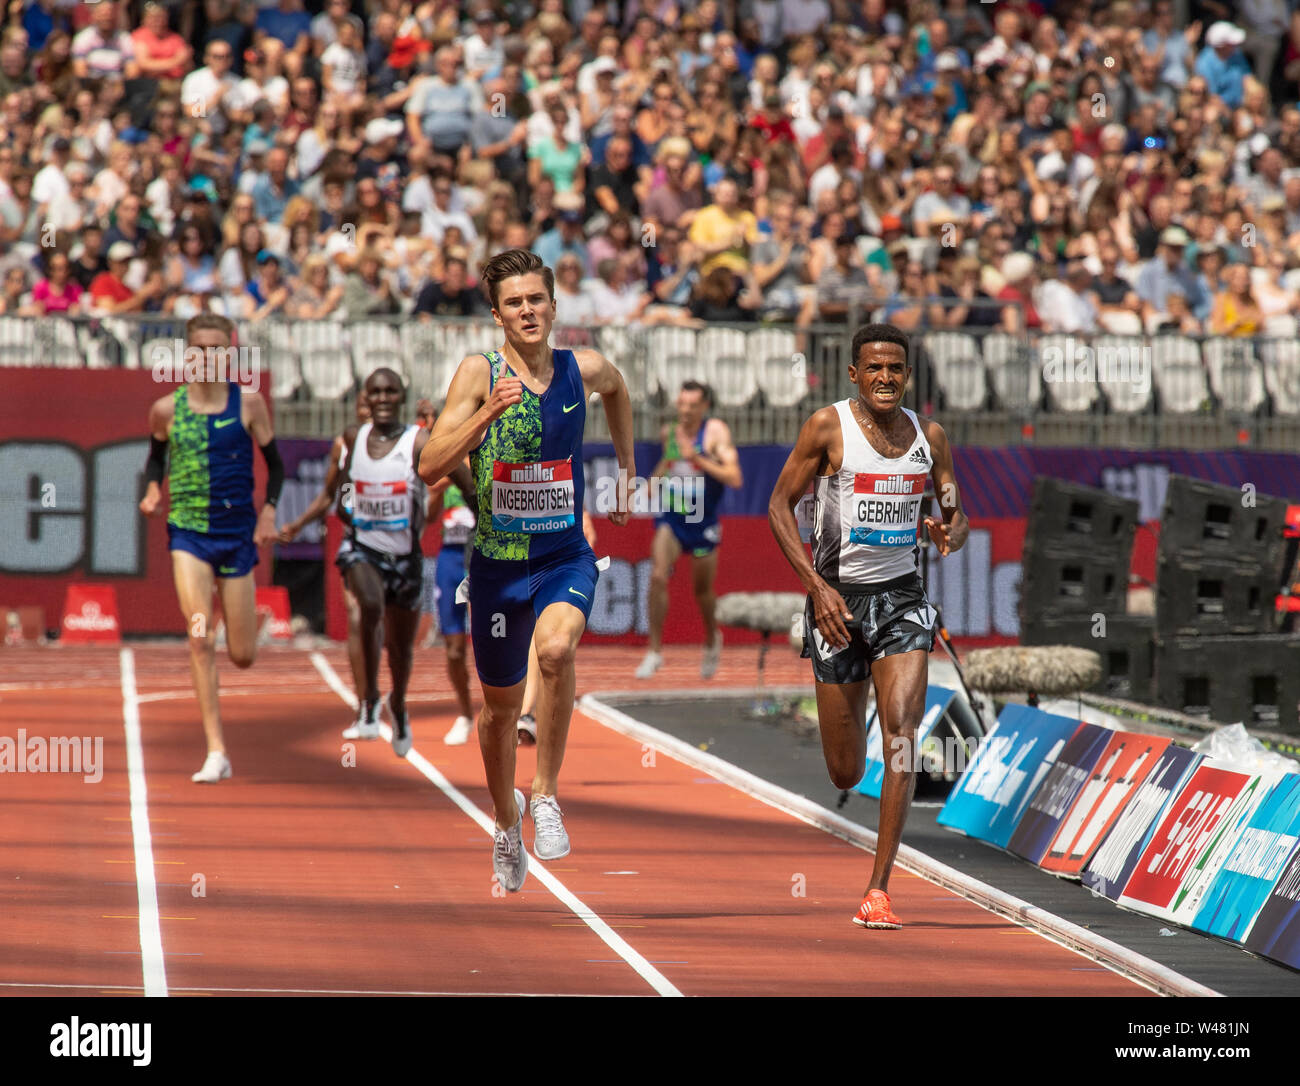 London, UK. 20th July, 2019. LONDON, ENGLAND - JULY 20: Jakob Ingebrigtsen of Norway and Hagos Gebrhiwet of Ethiopia (R) race to the finishing line in the Men's 5000m during Day One of the Muller Anniversary Games IAAF Diamond League event at the London Stadium on July 20, 2019 in London, England. Gary Mitchell/ Alamy Live News Stock Photo